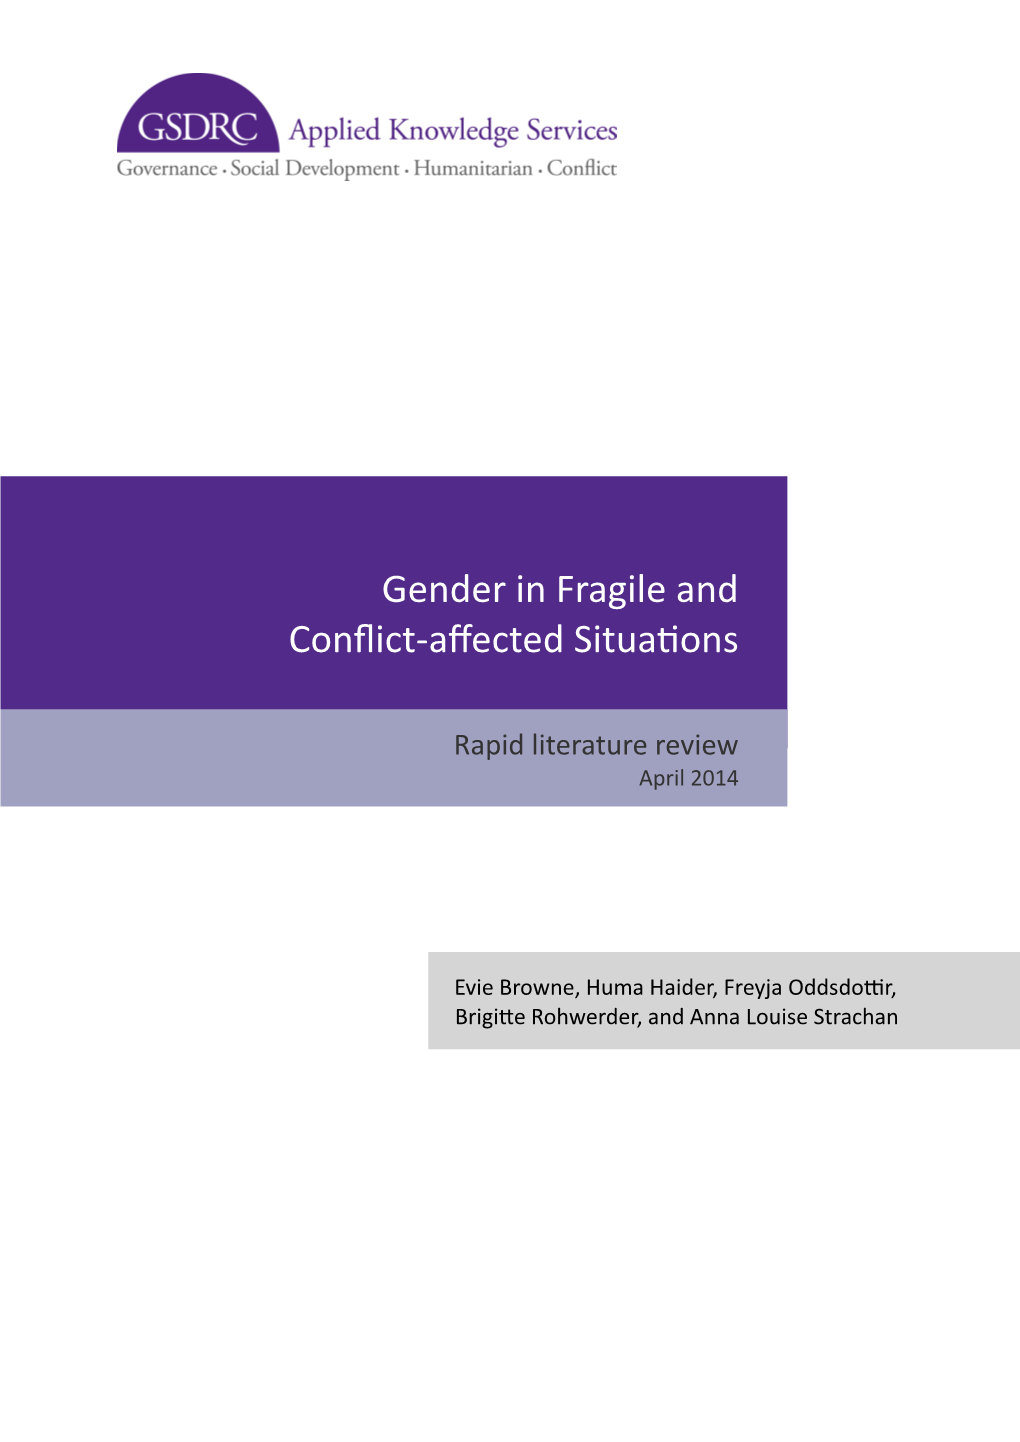 Gender in Fragile and Conflict-Affected Situations